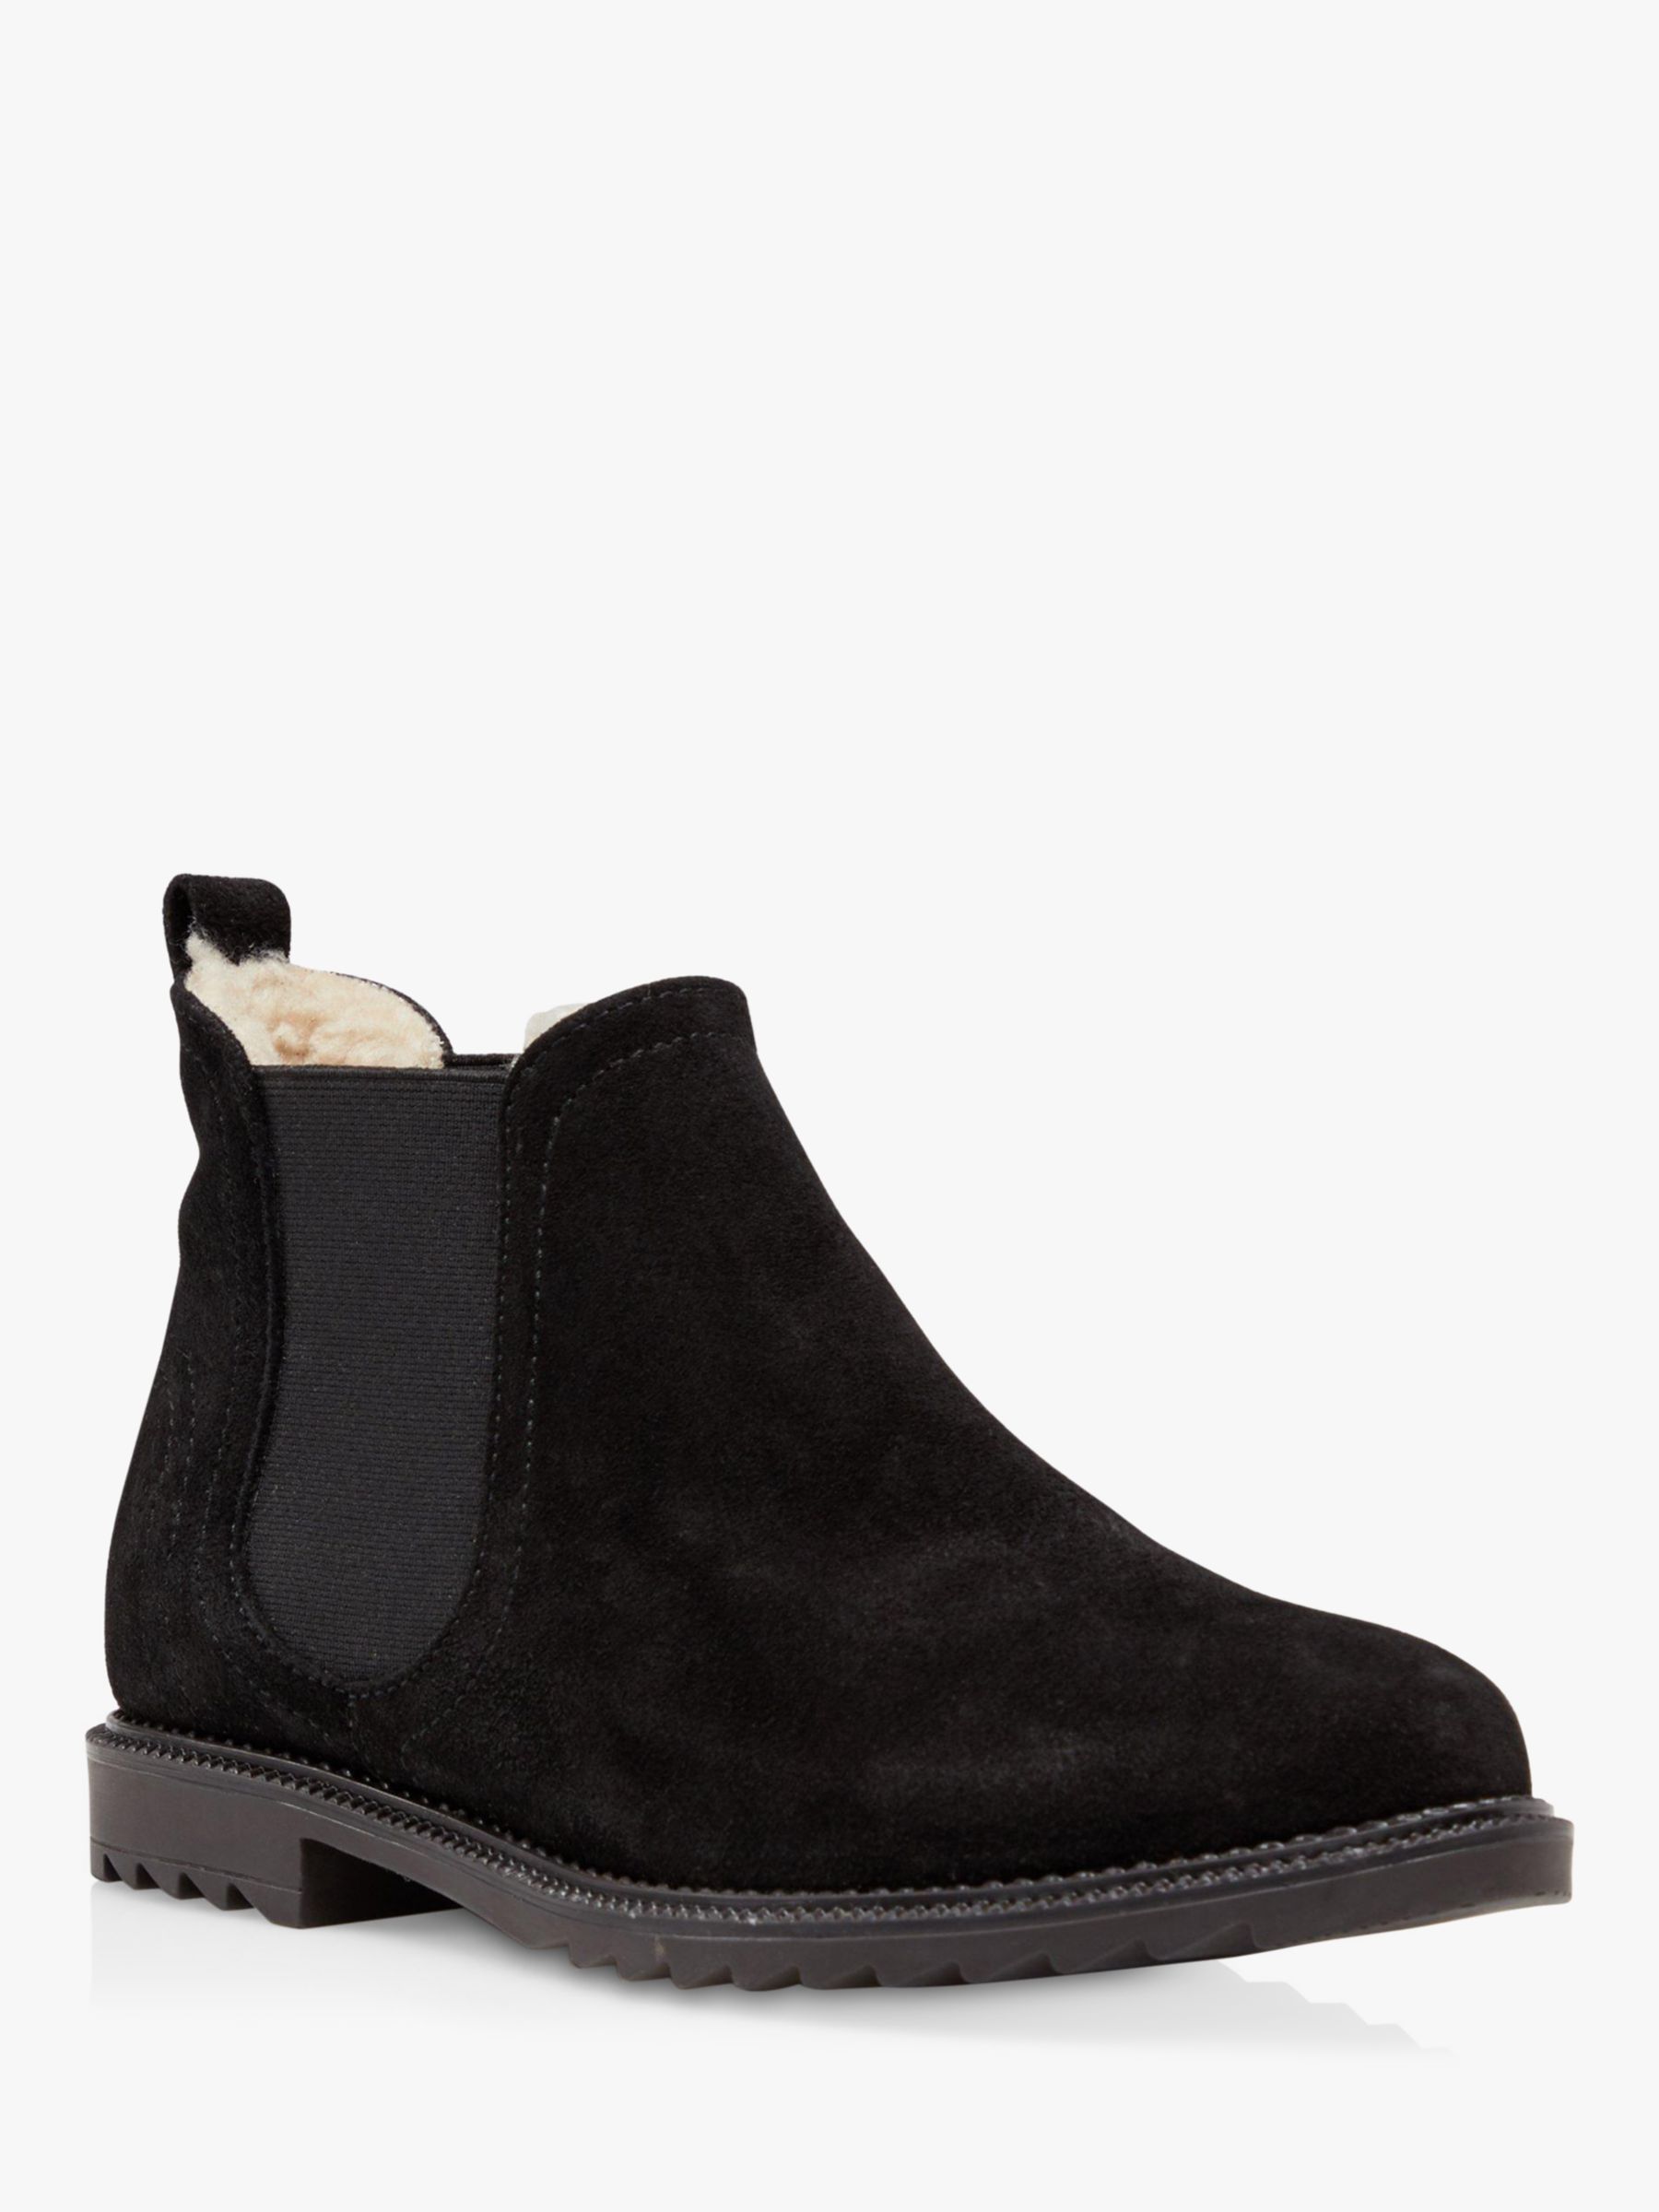 Dune Pedal Suede Faux Shearling Chelsea Boots, Black at Lewis & Partners